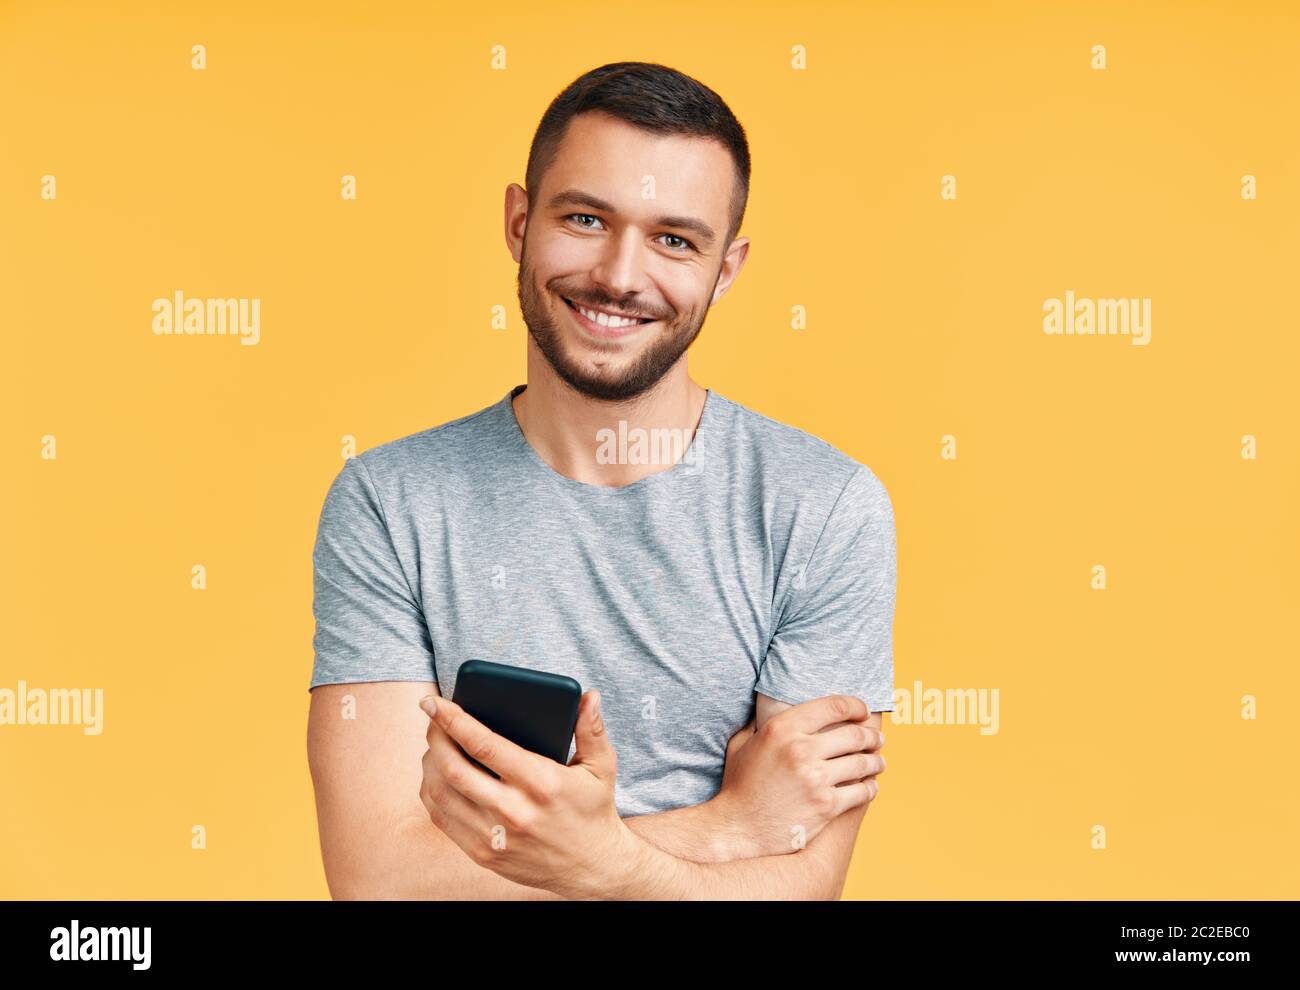 Handsome smiling man holding mobile phone and looking to camera in yellow studio background Stock Photo